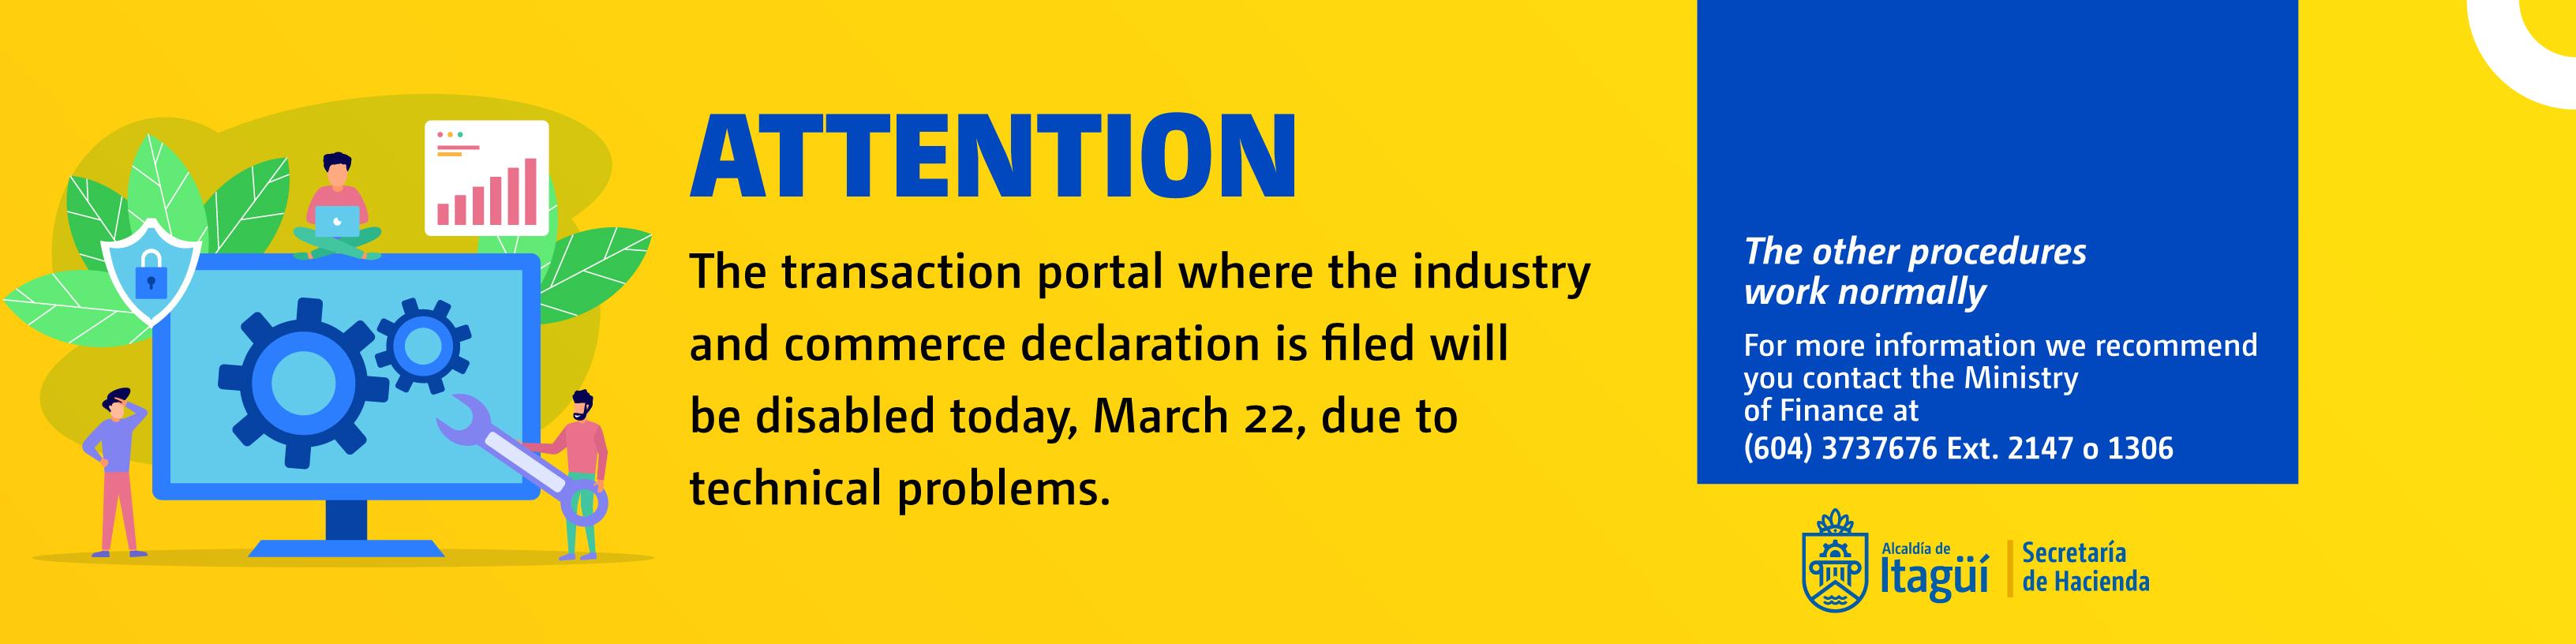 Attention, the transactional portal where the declaration of industry and commerce is made will be disabled today, March 22, due to technical problems